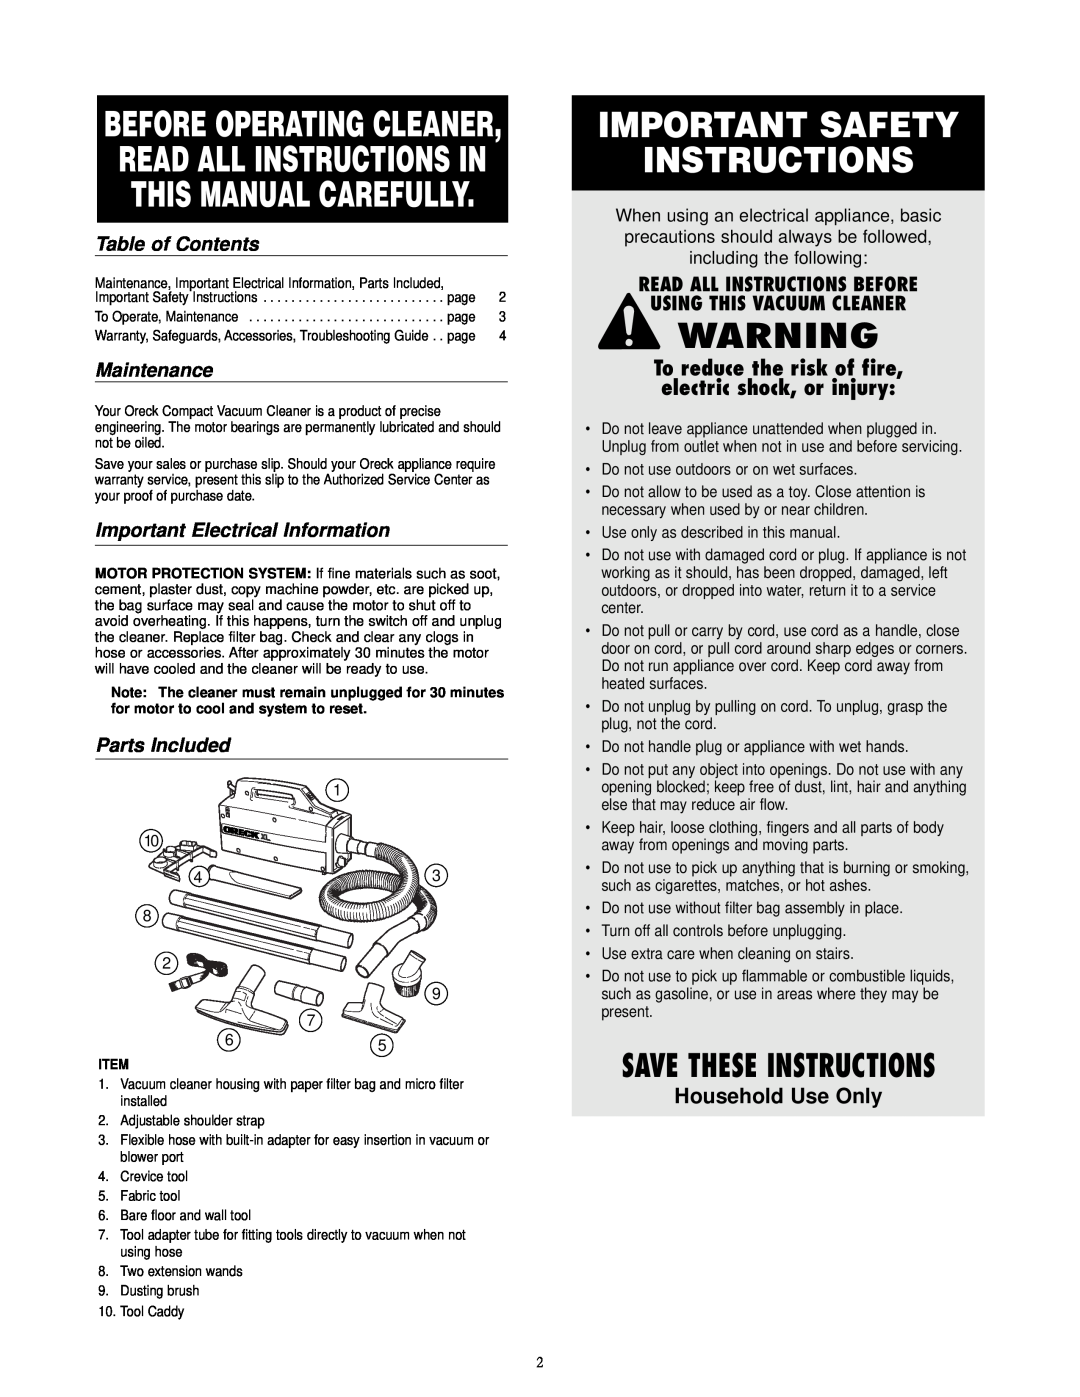 Oreck BB877-RD Save These Instructions, Table of Contents, Maintenance, Important Electrical Information, Parts Included 